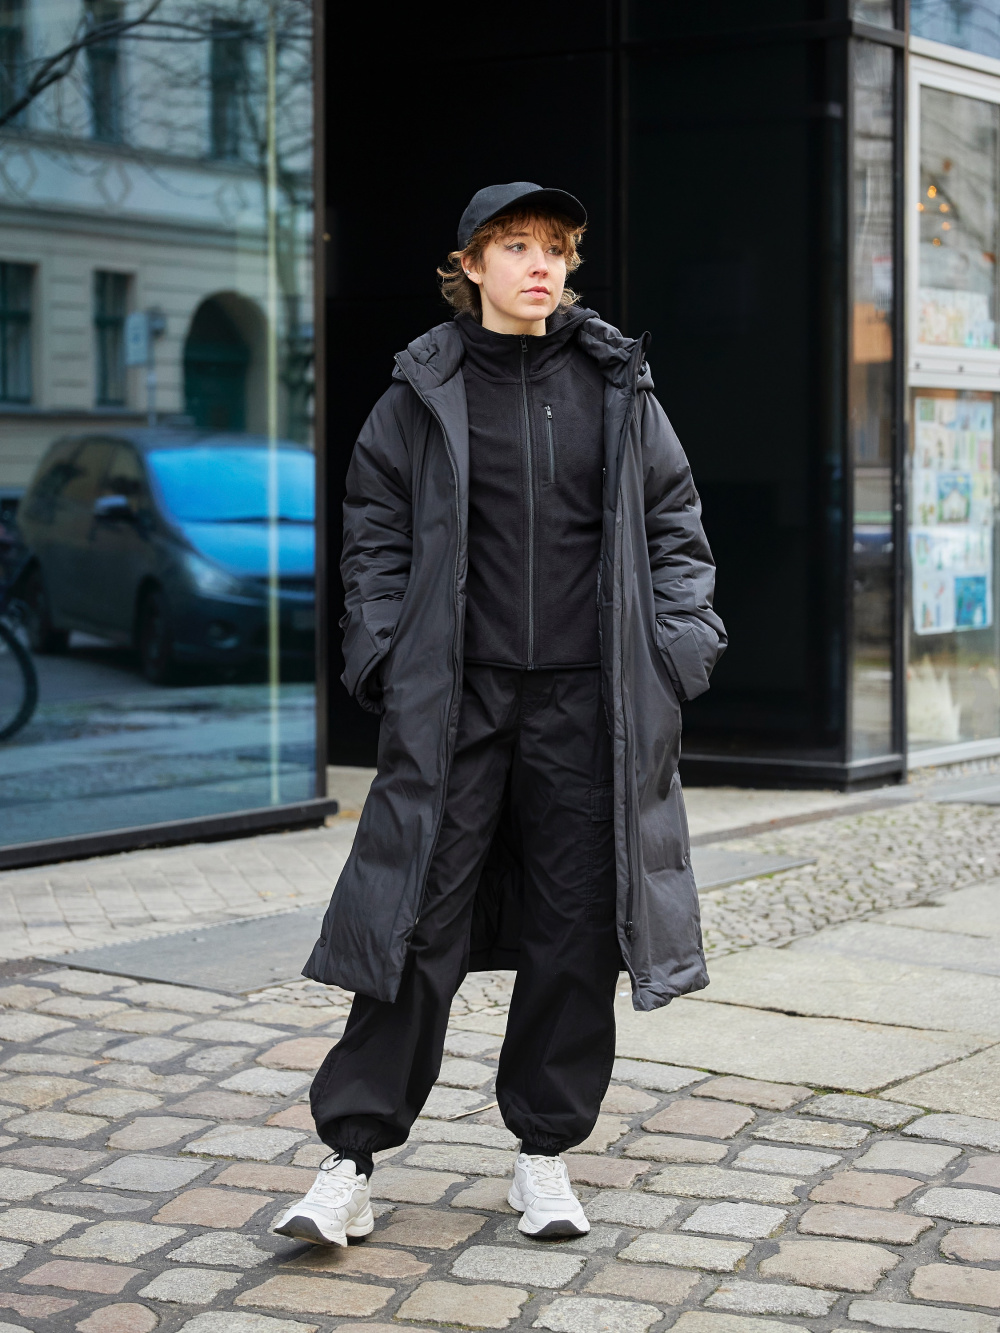 Check styling ideas for「Ultra Stretch AIRism Jogger Pants」